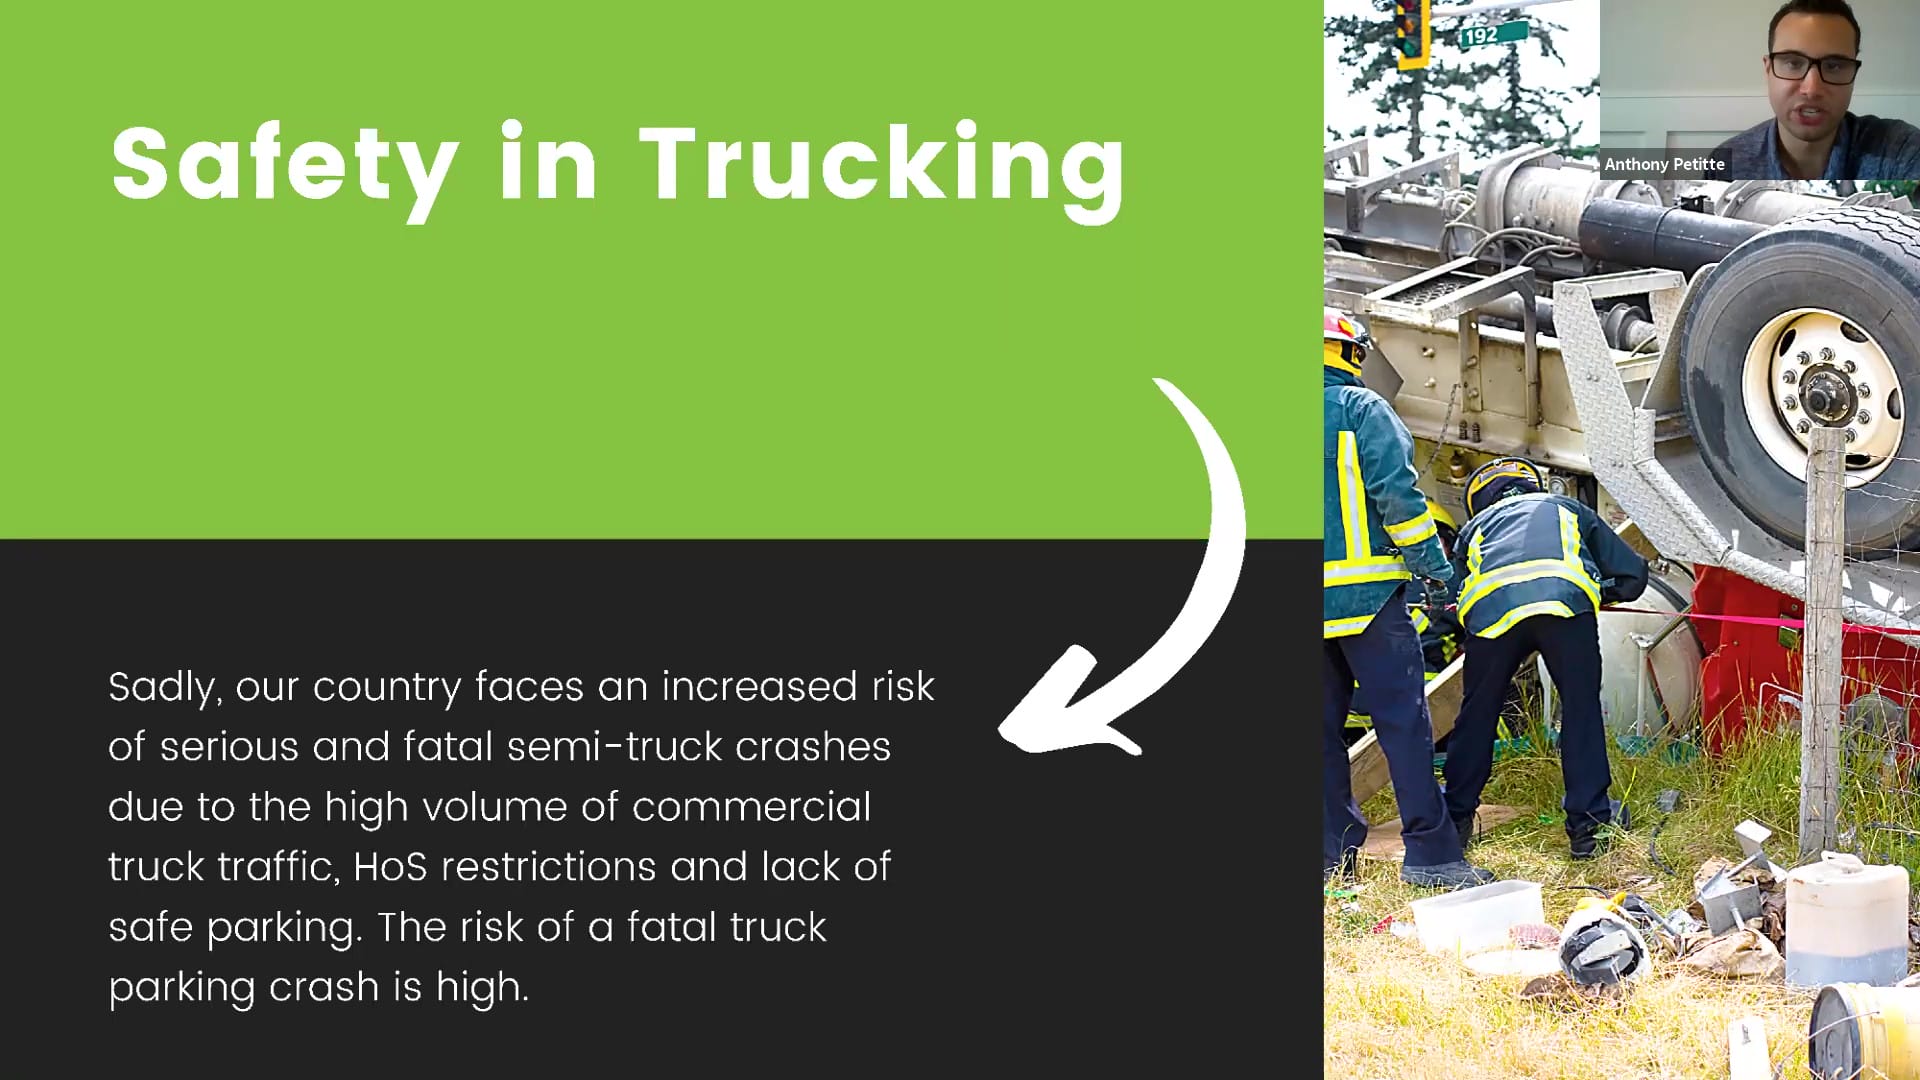 Truck Drivers Safe Parking is a Top Challenge Safety in Trucking